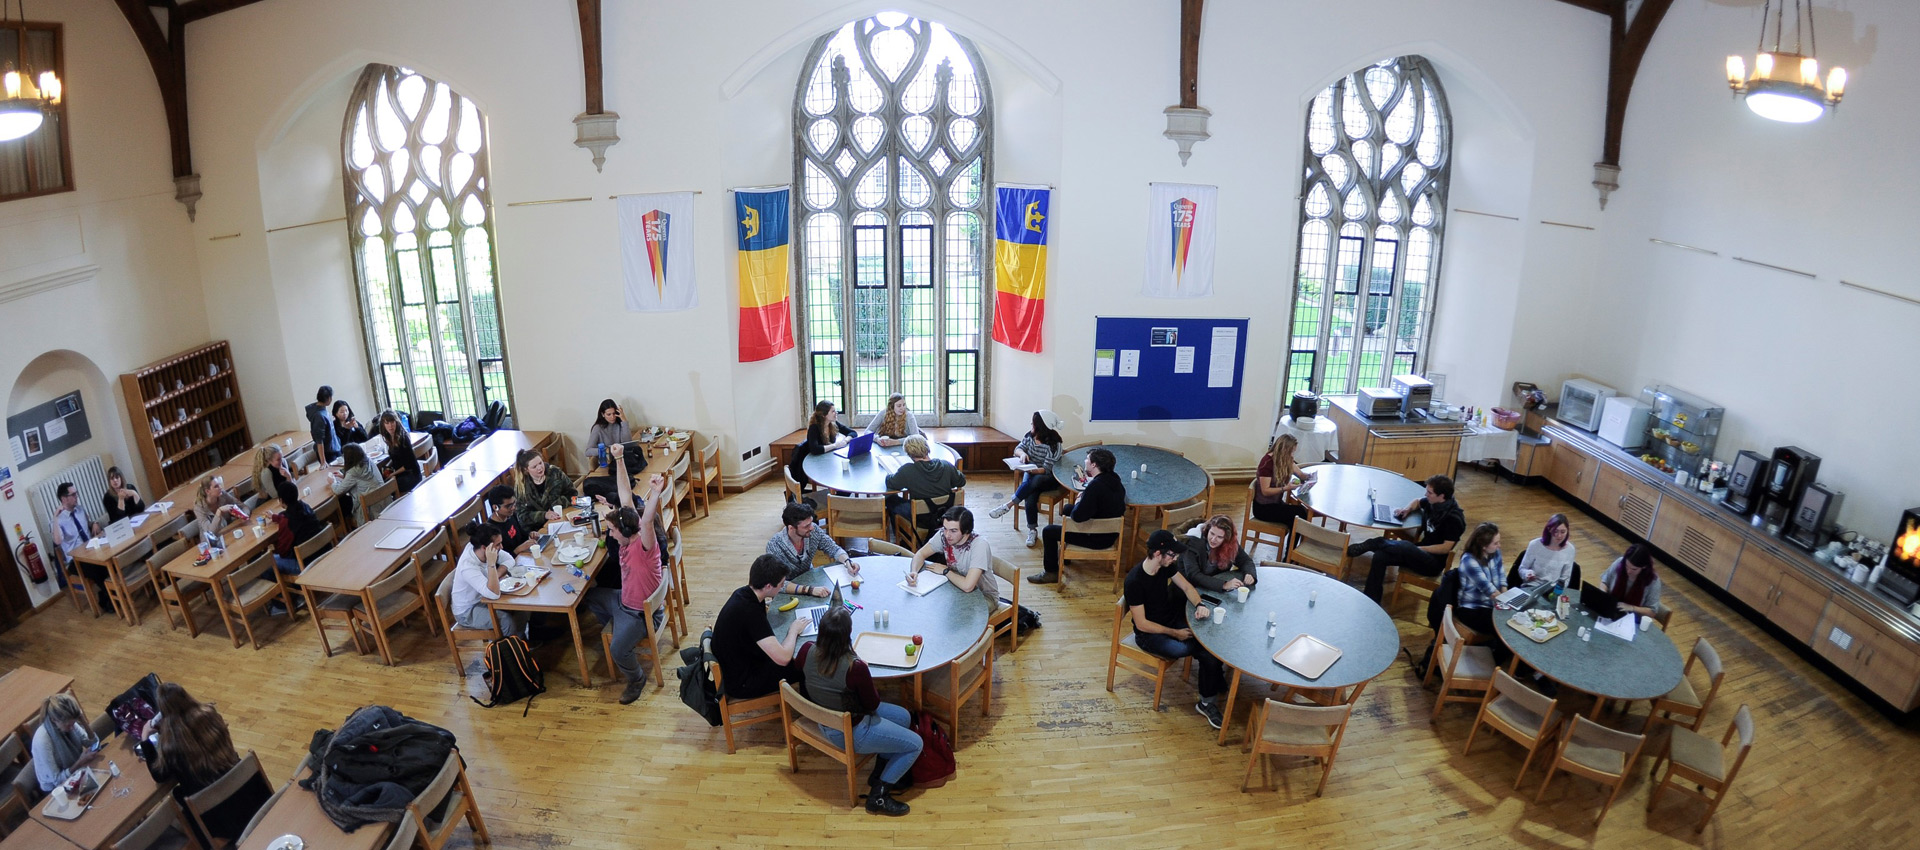 The Castle's Dining Hall